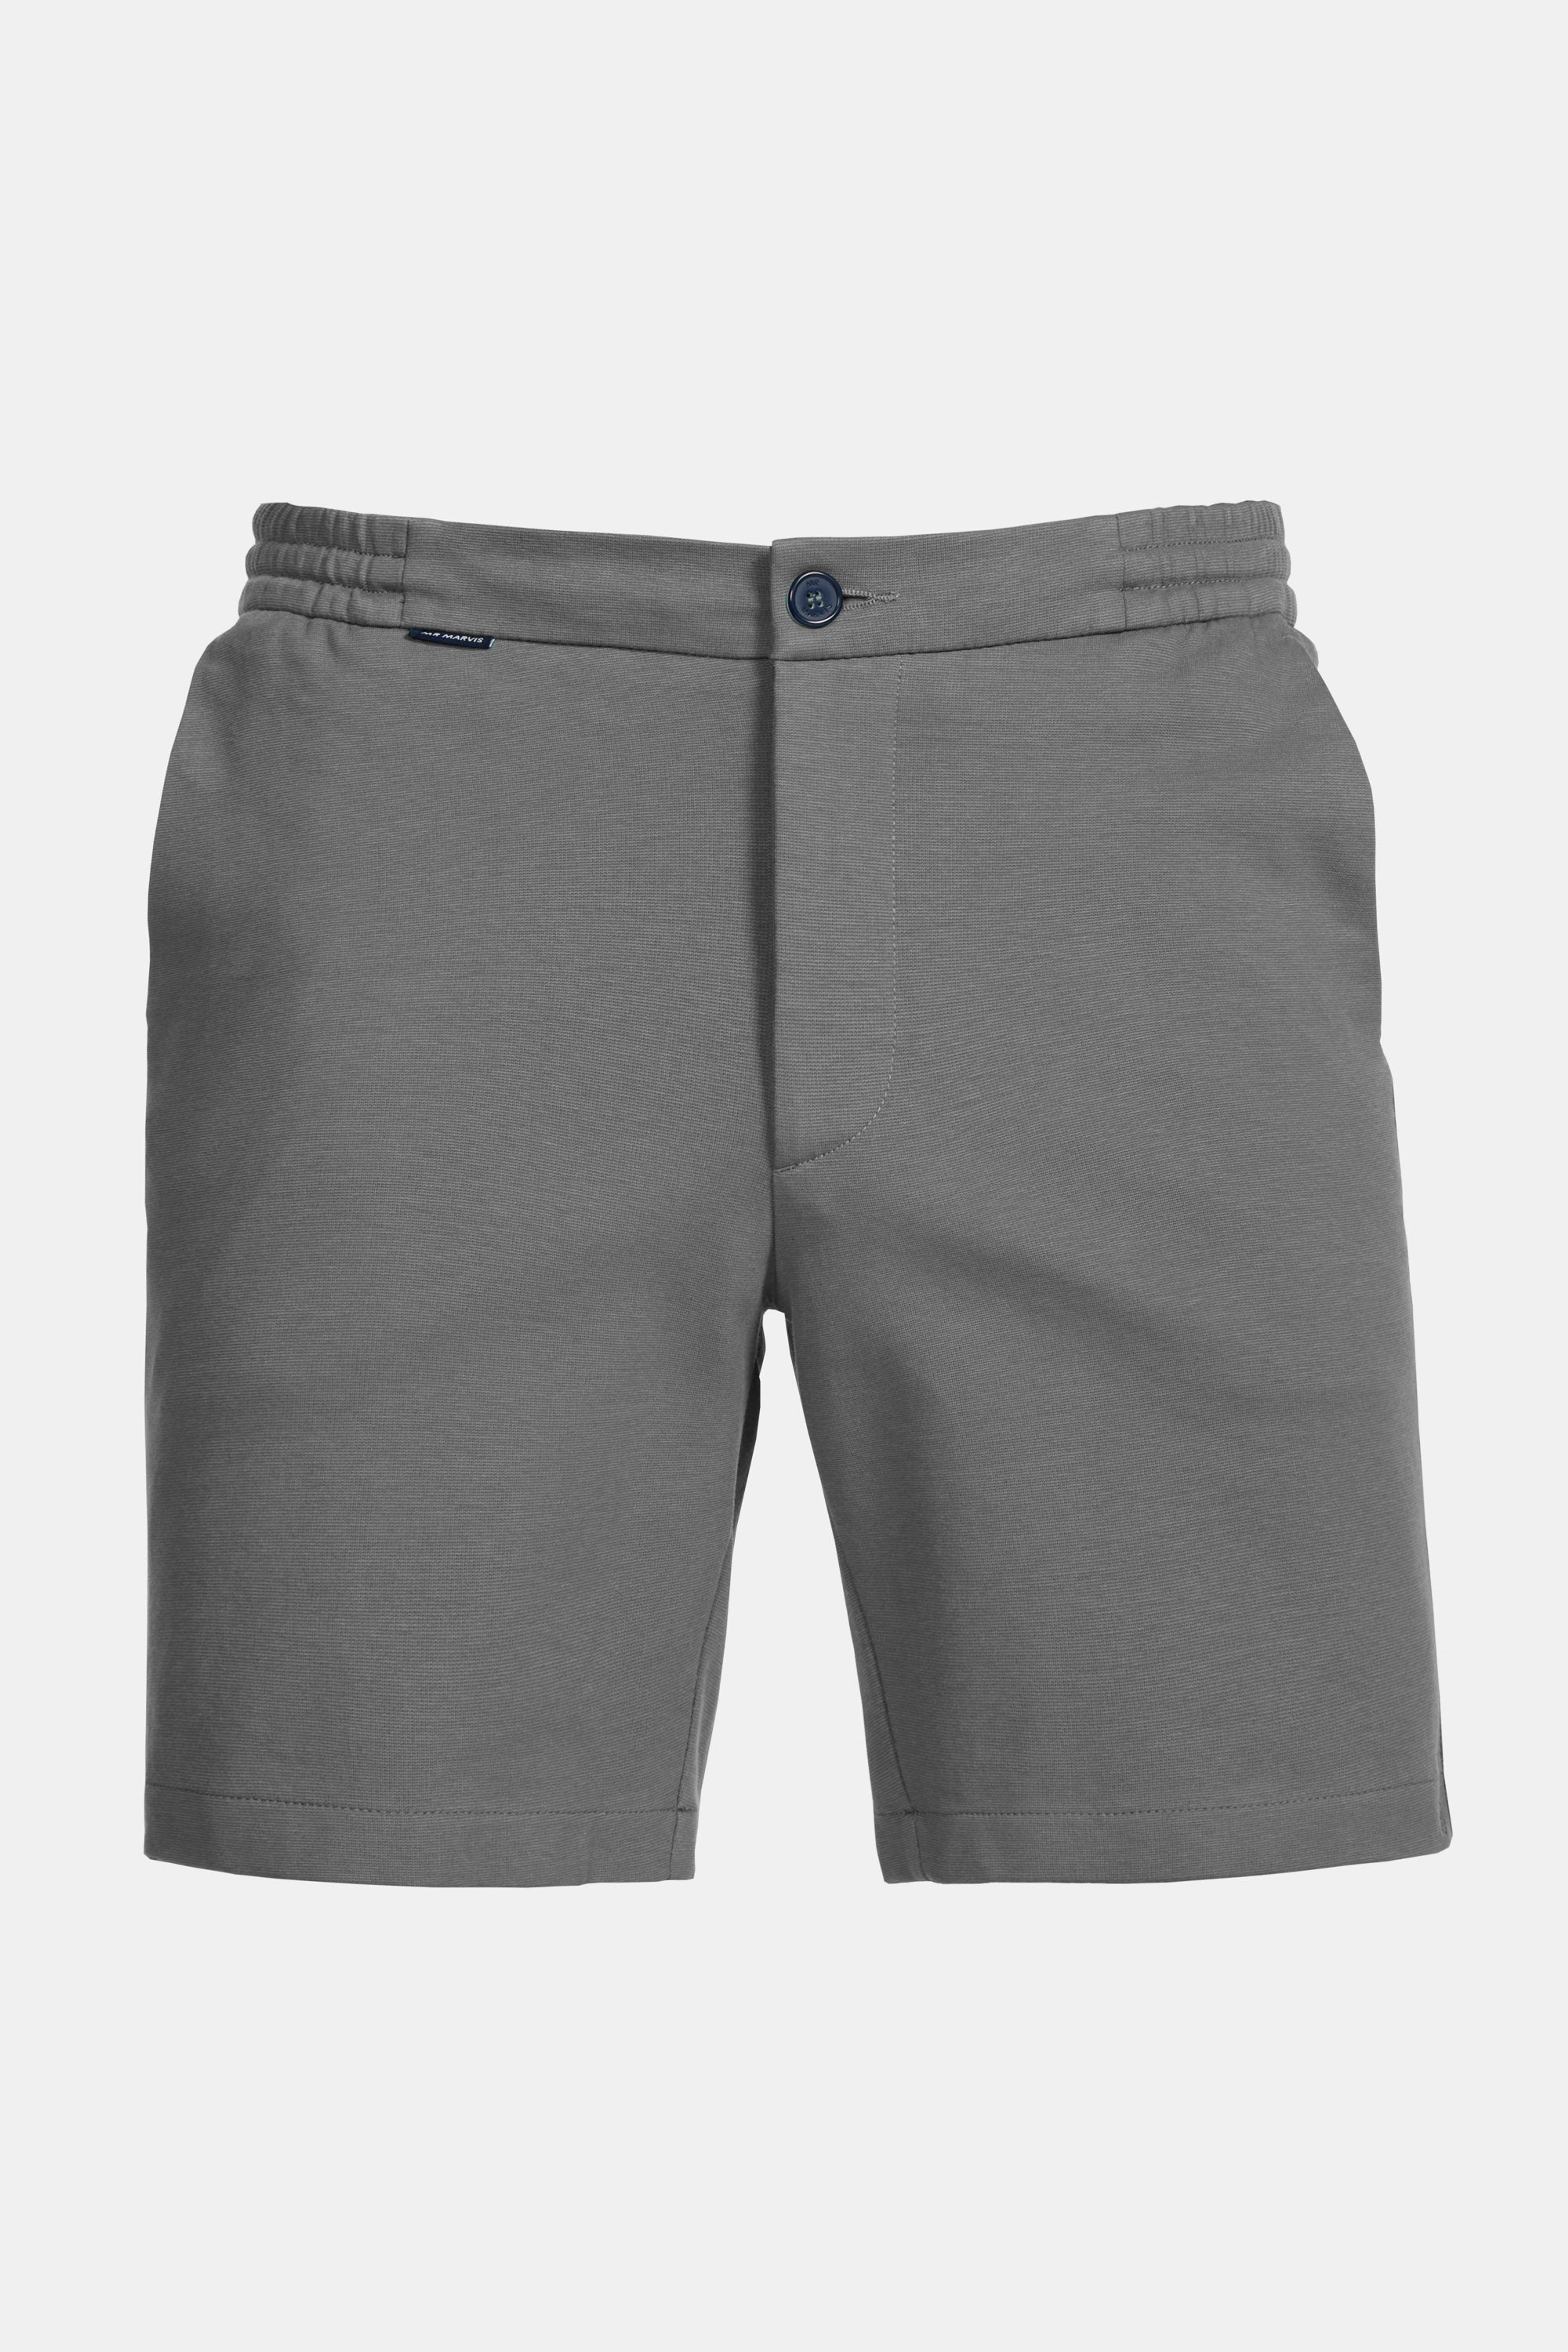 Newmans - Shorts Easies